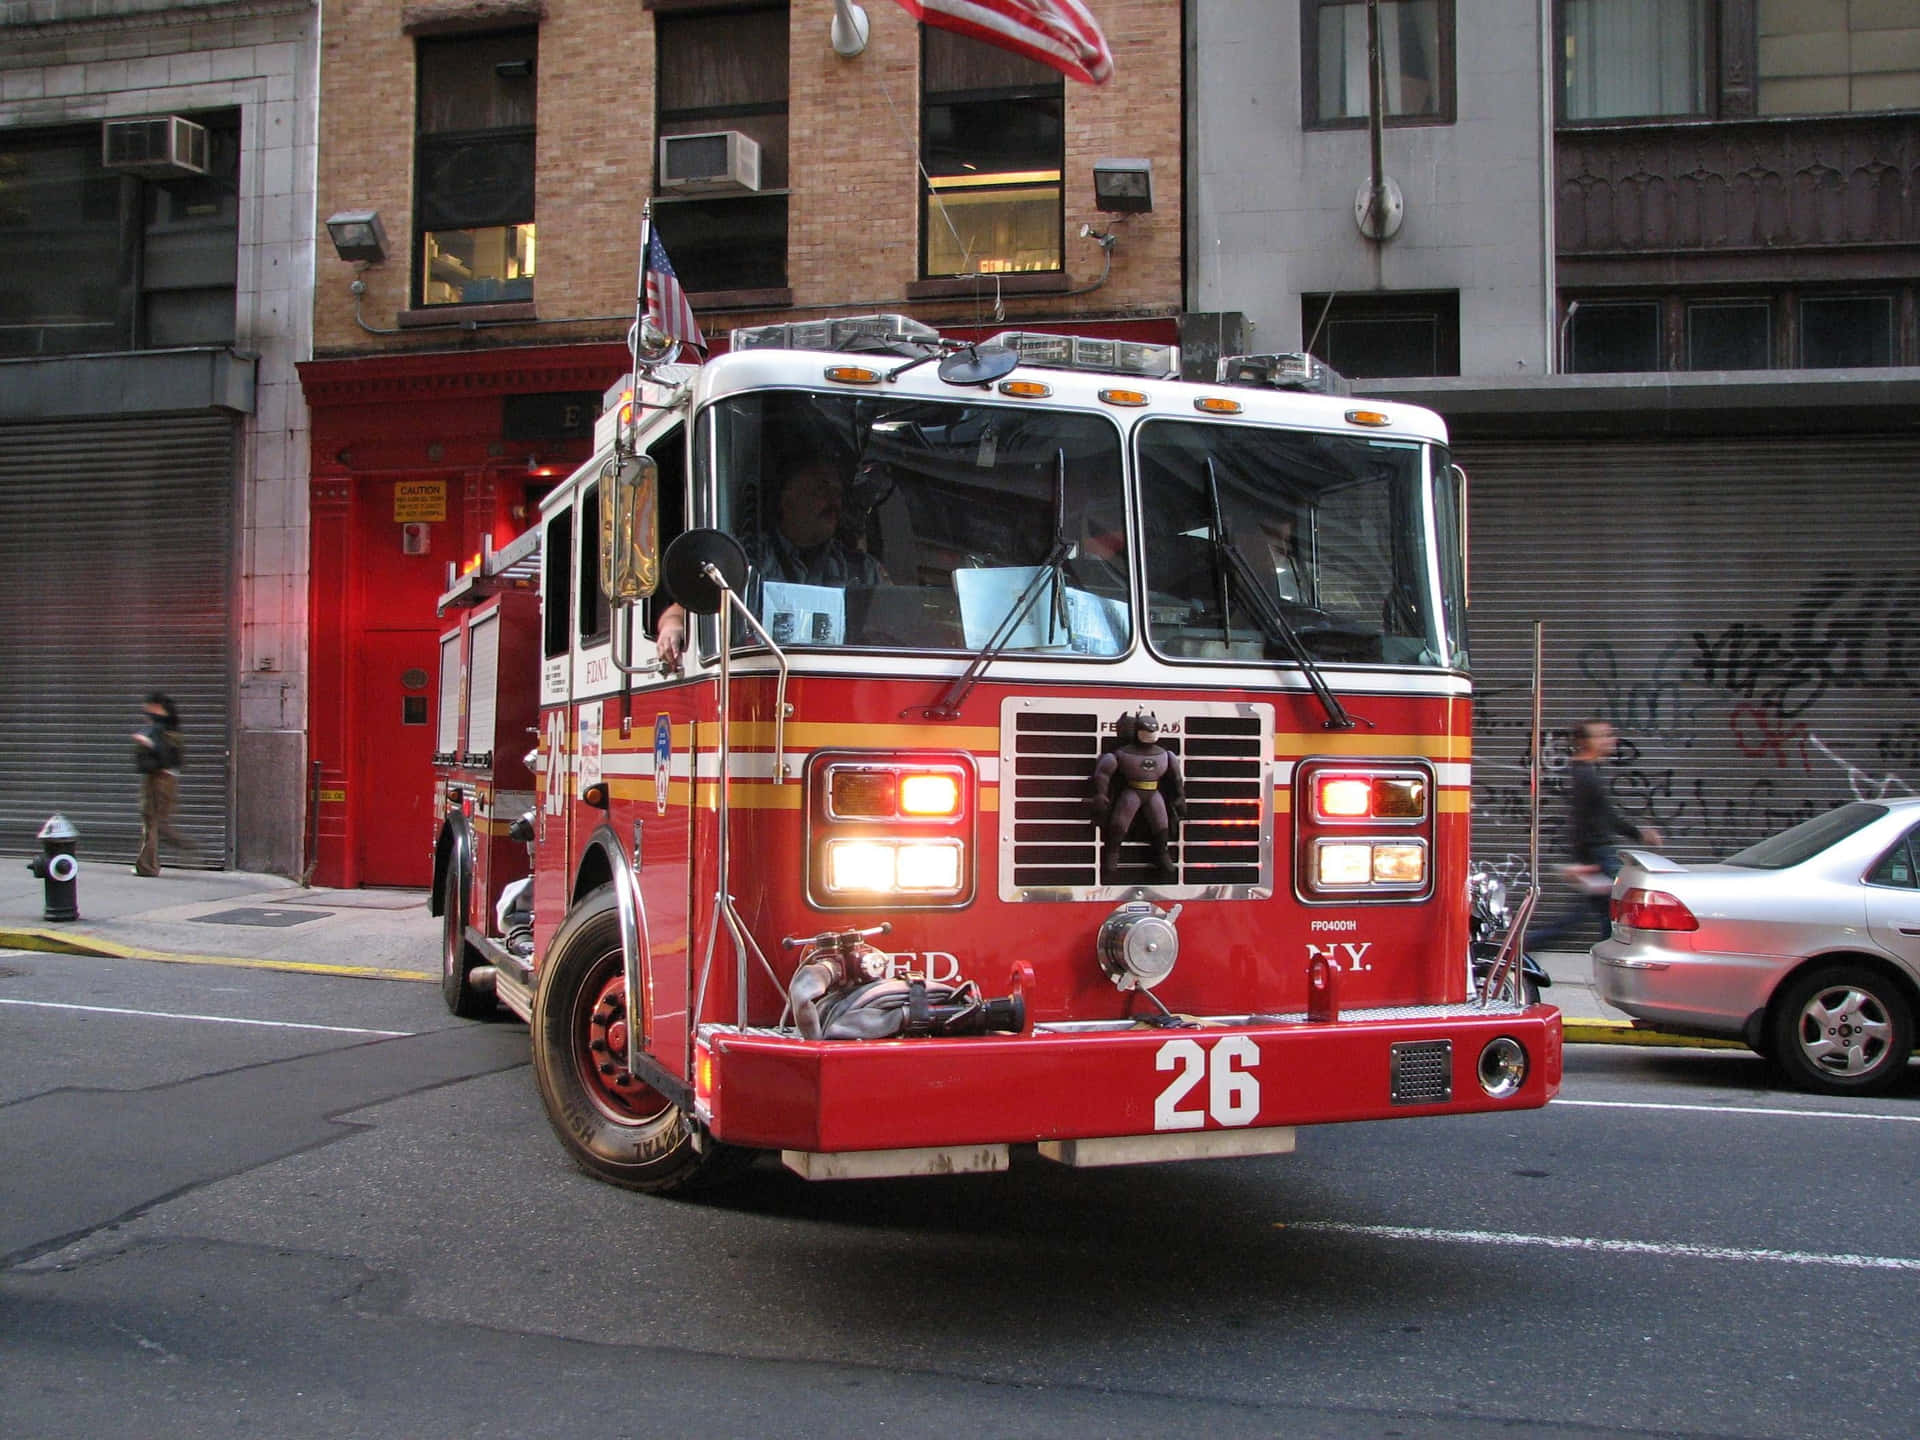 A Fire Truck On The Street